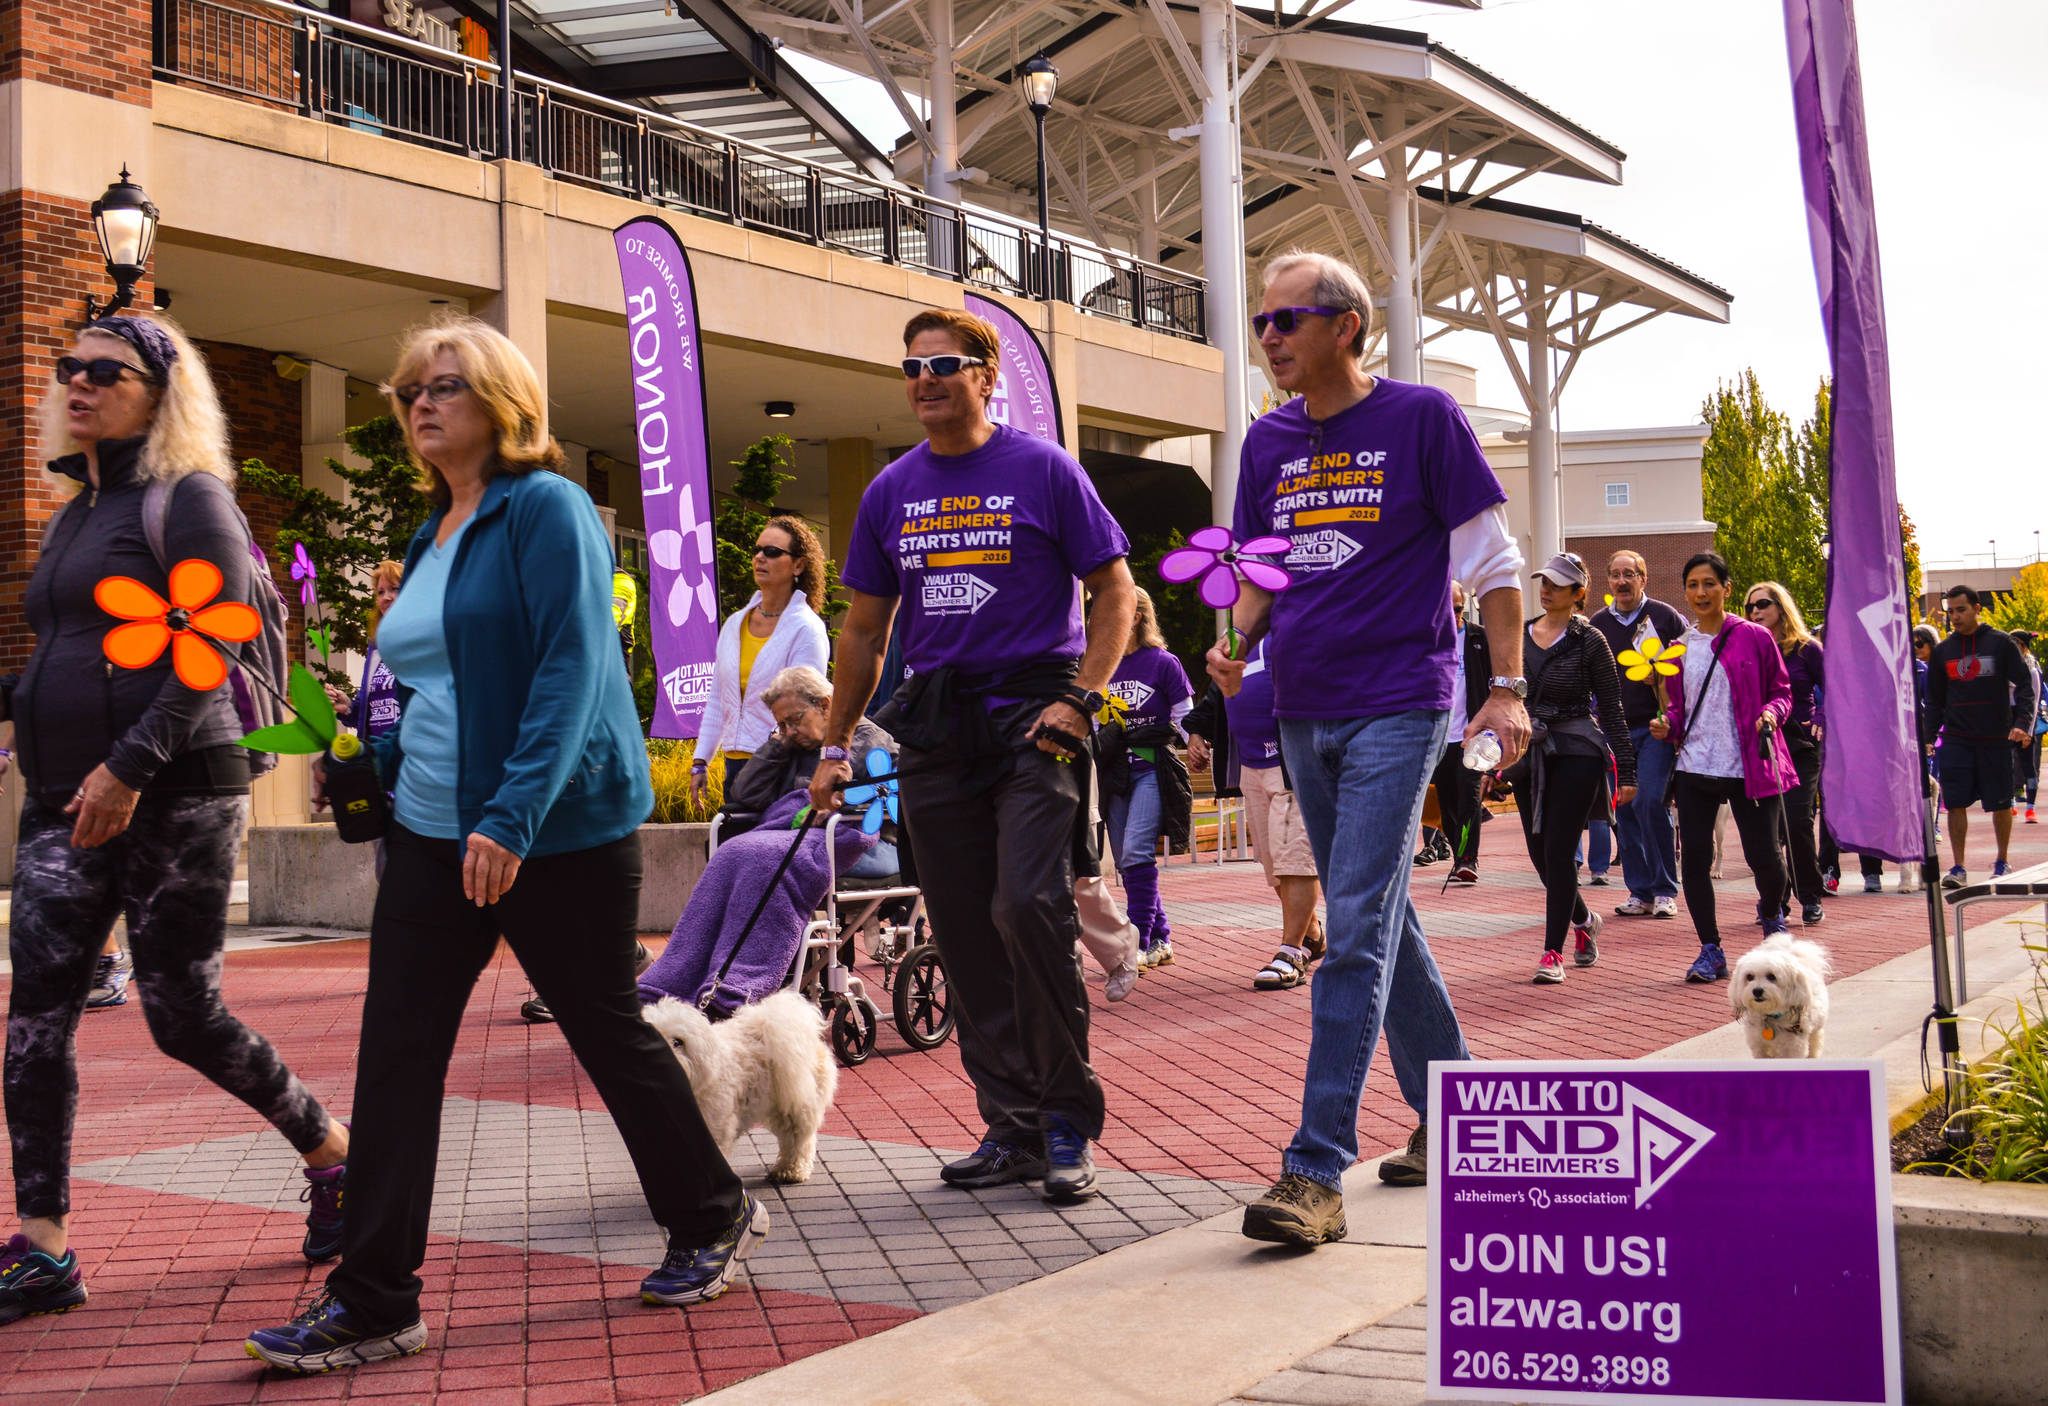 Participants in a Walk to End Alzheimer’s event. Contributed photo